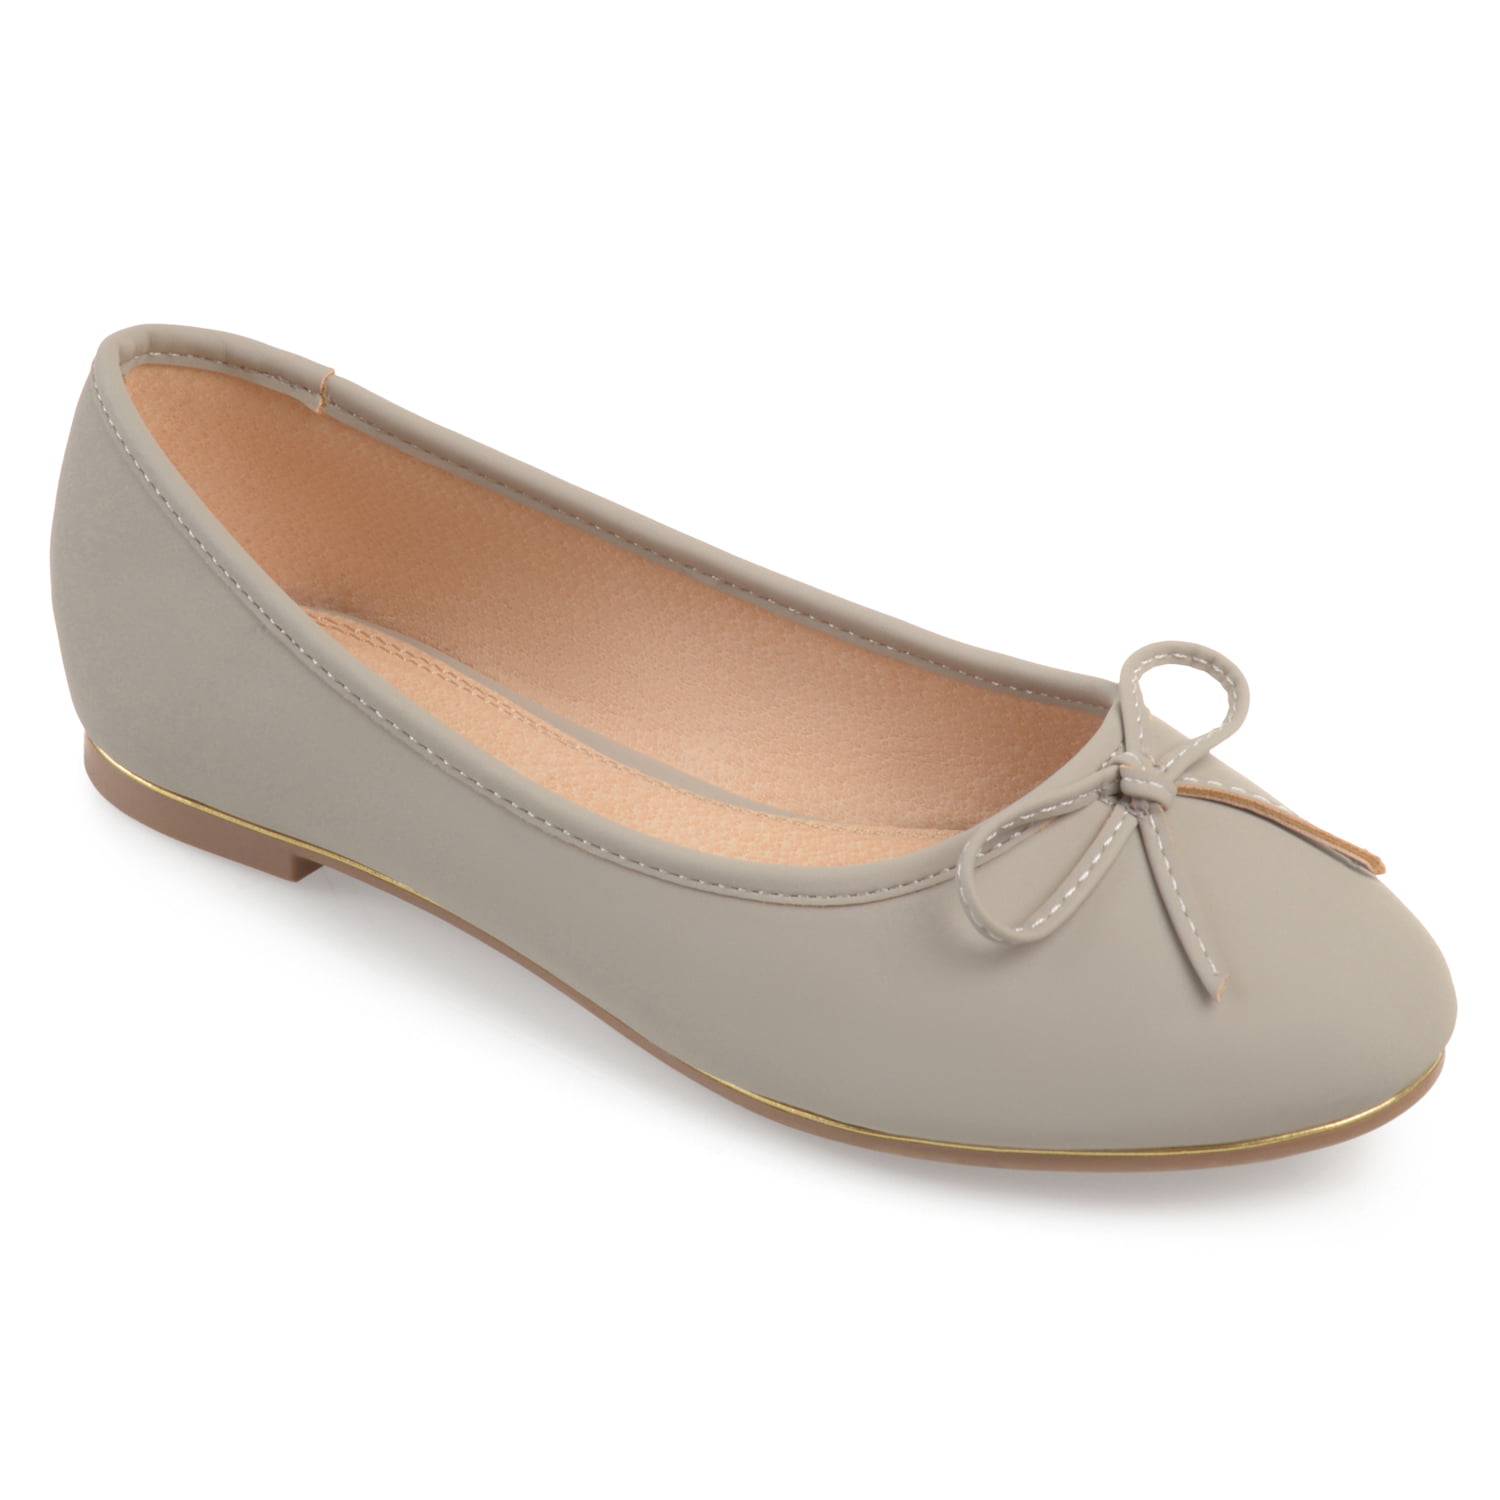 wide width ballet flats with arch support